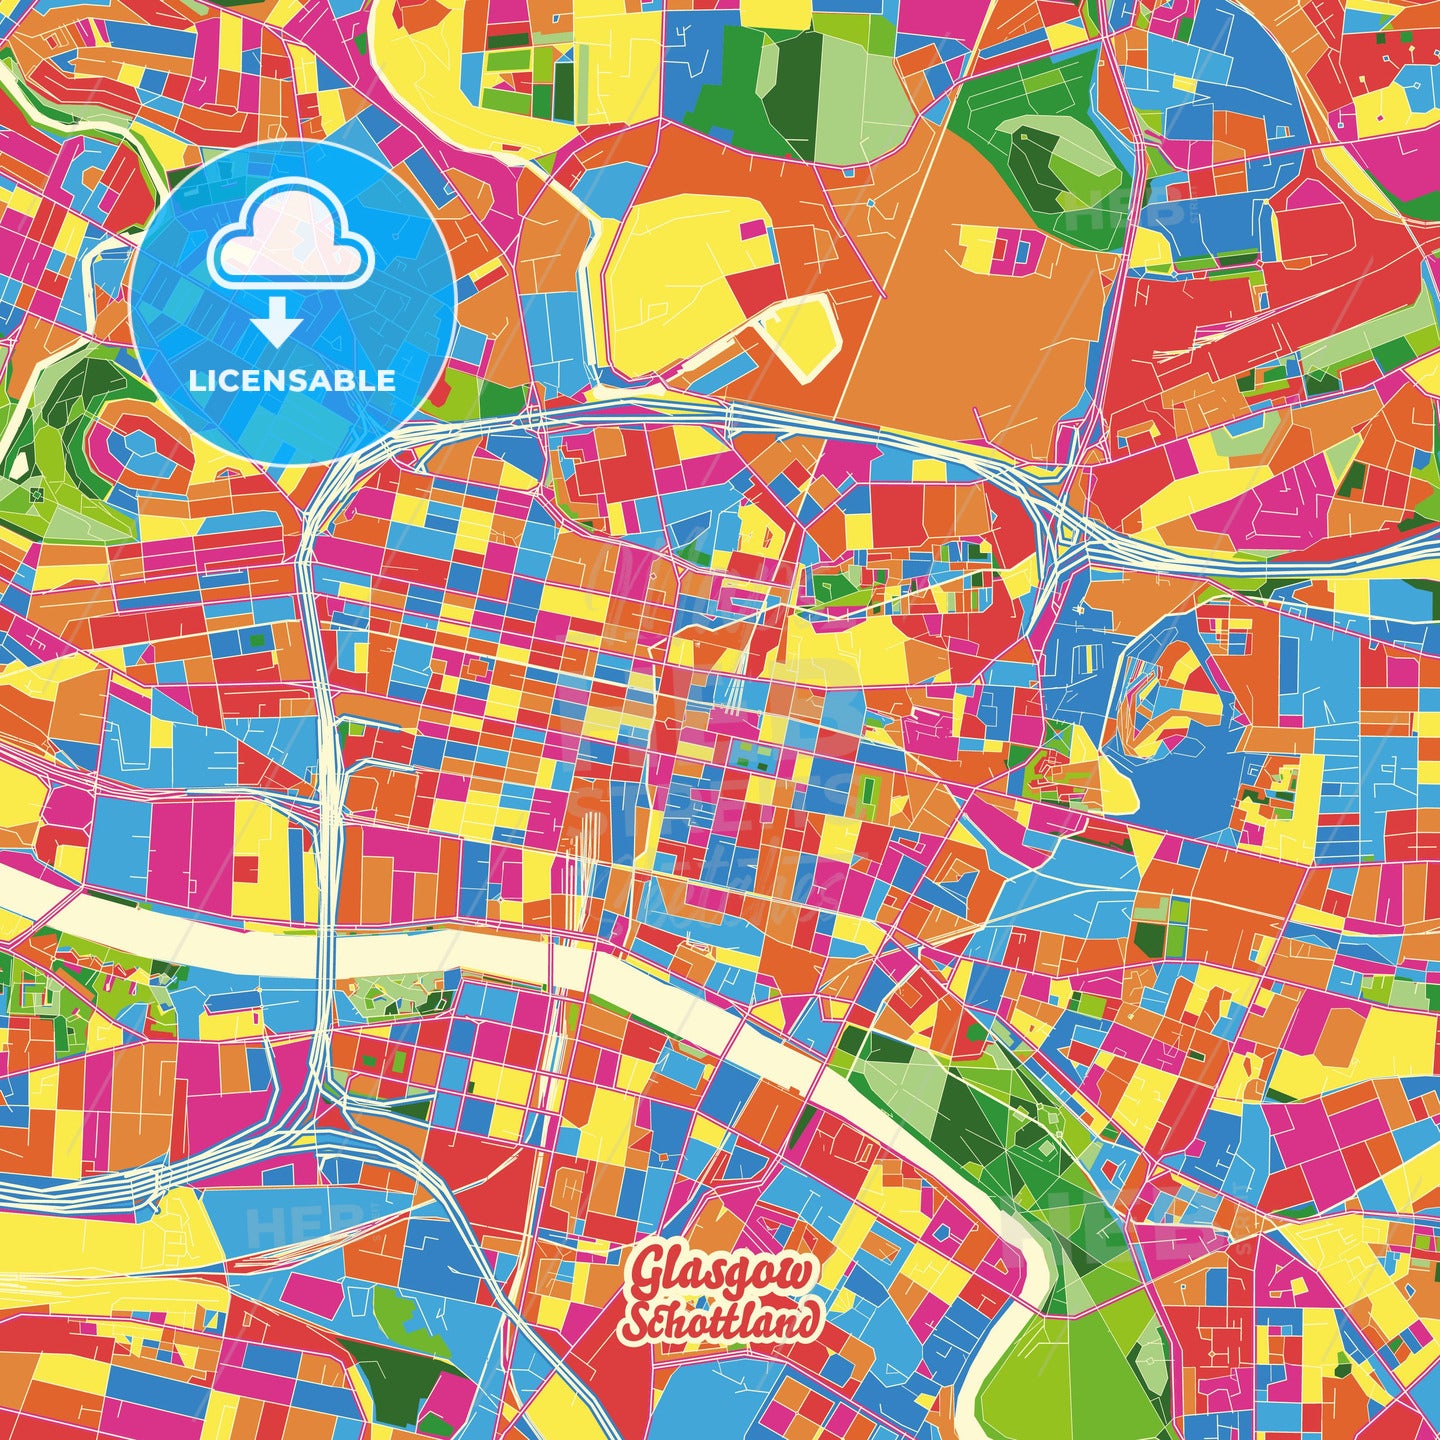 Glasgow, Scotland Crazy Colorful Street Map Poster Template - HEBSTREITS Sketches